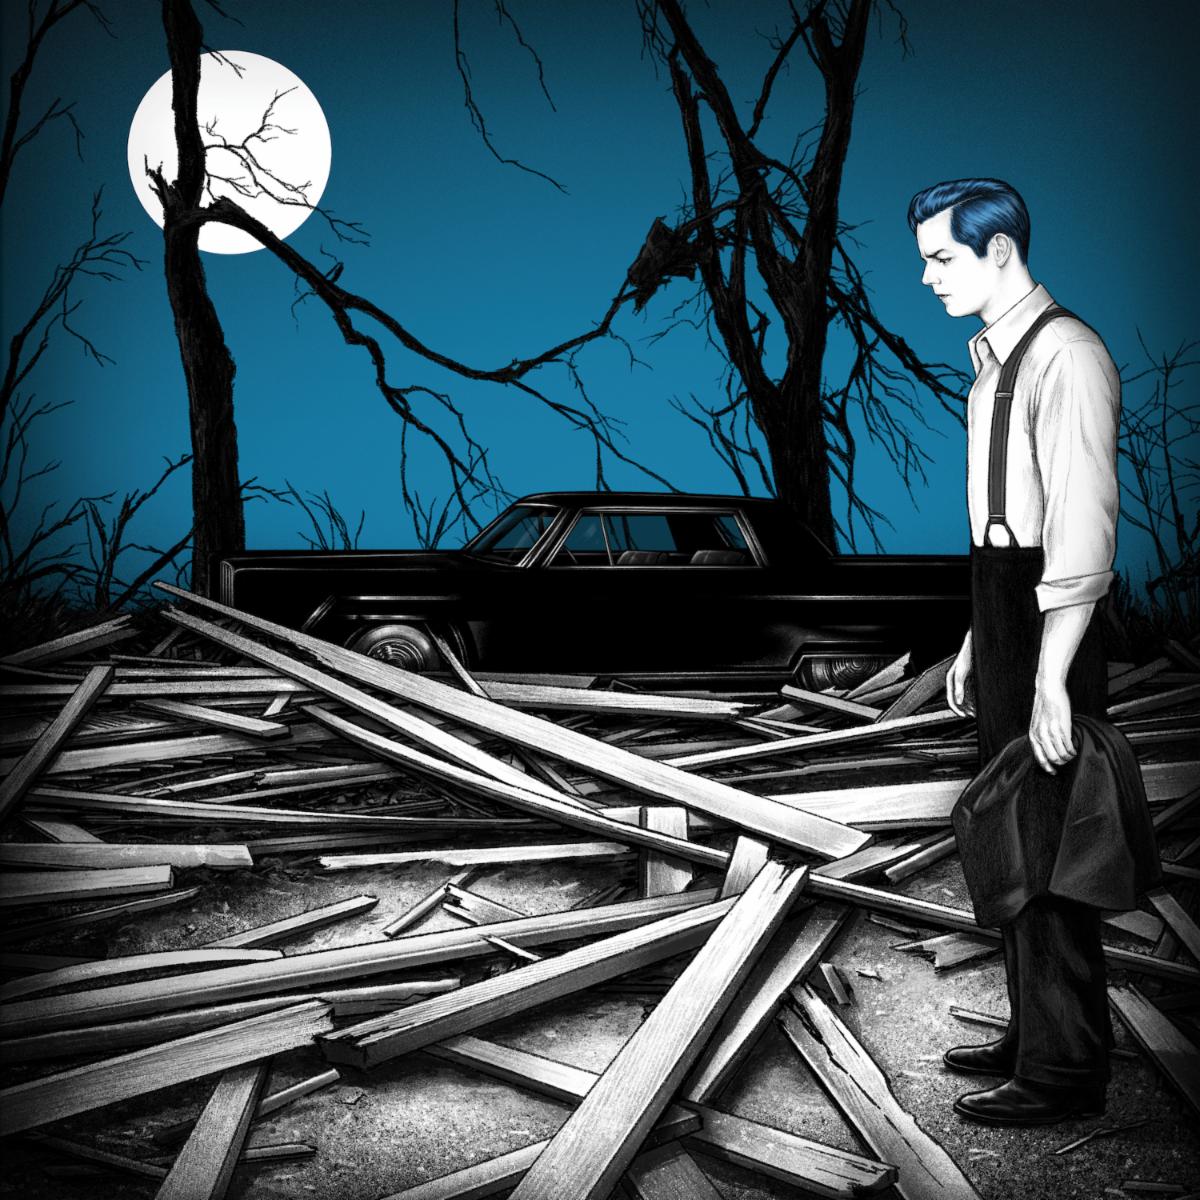 Jack White unveils new album 'Fear Of The Dawn'